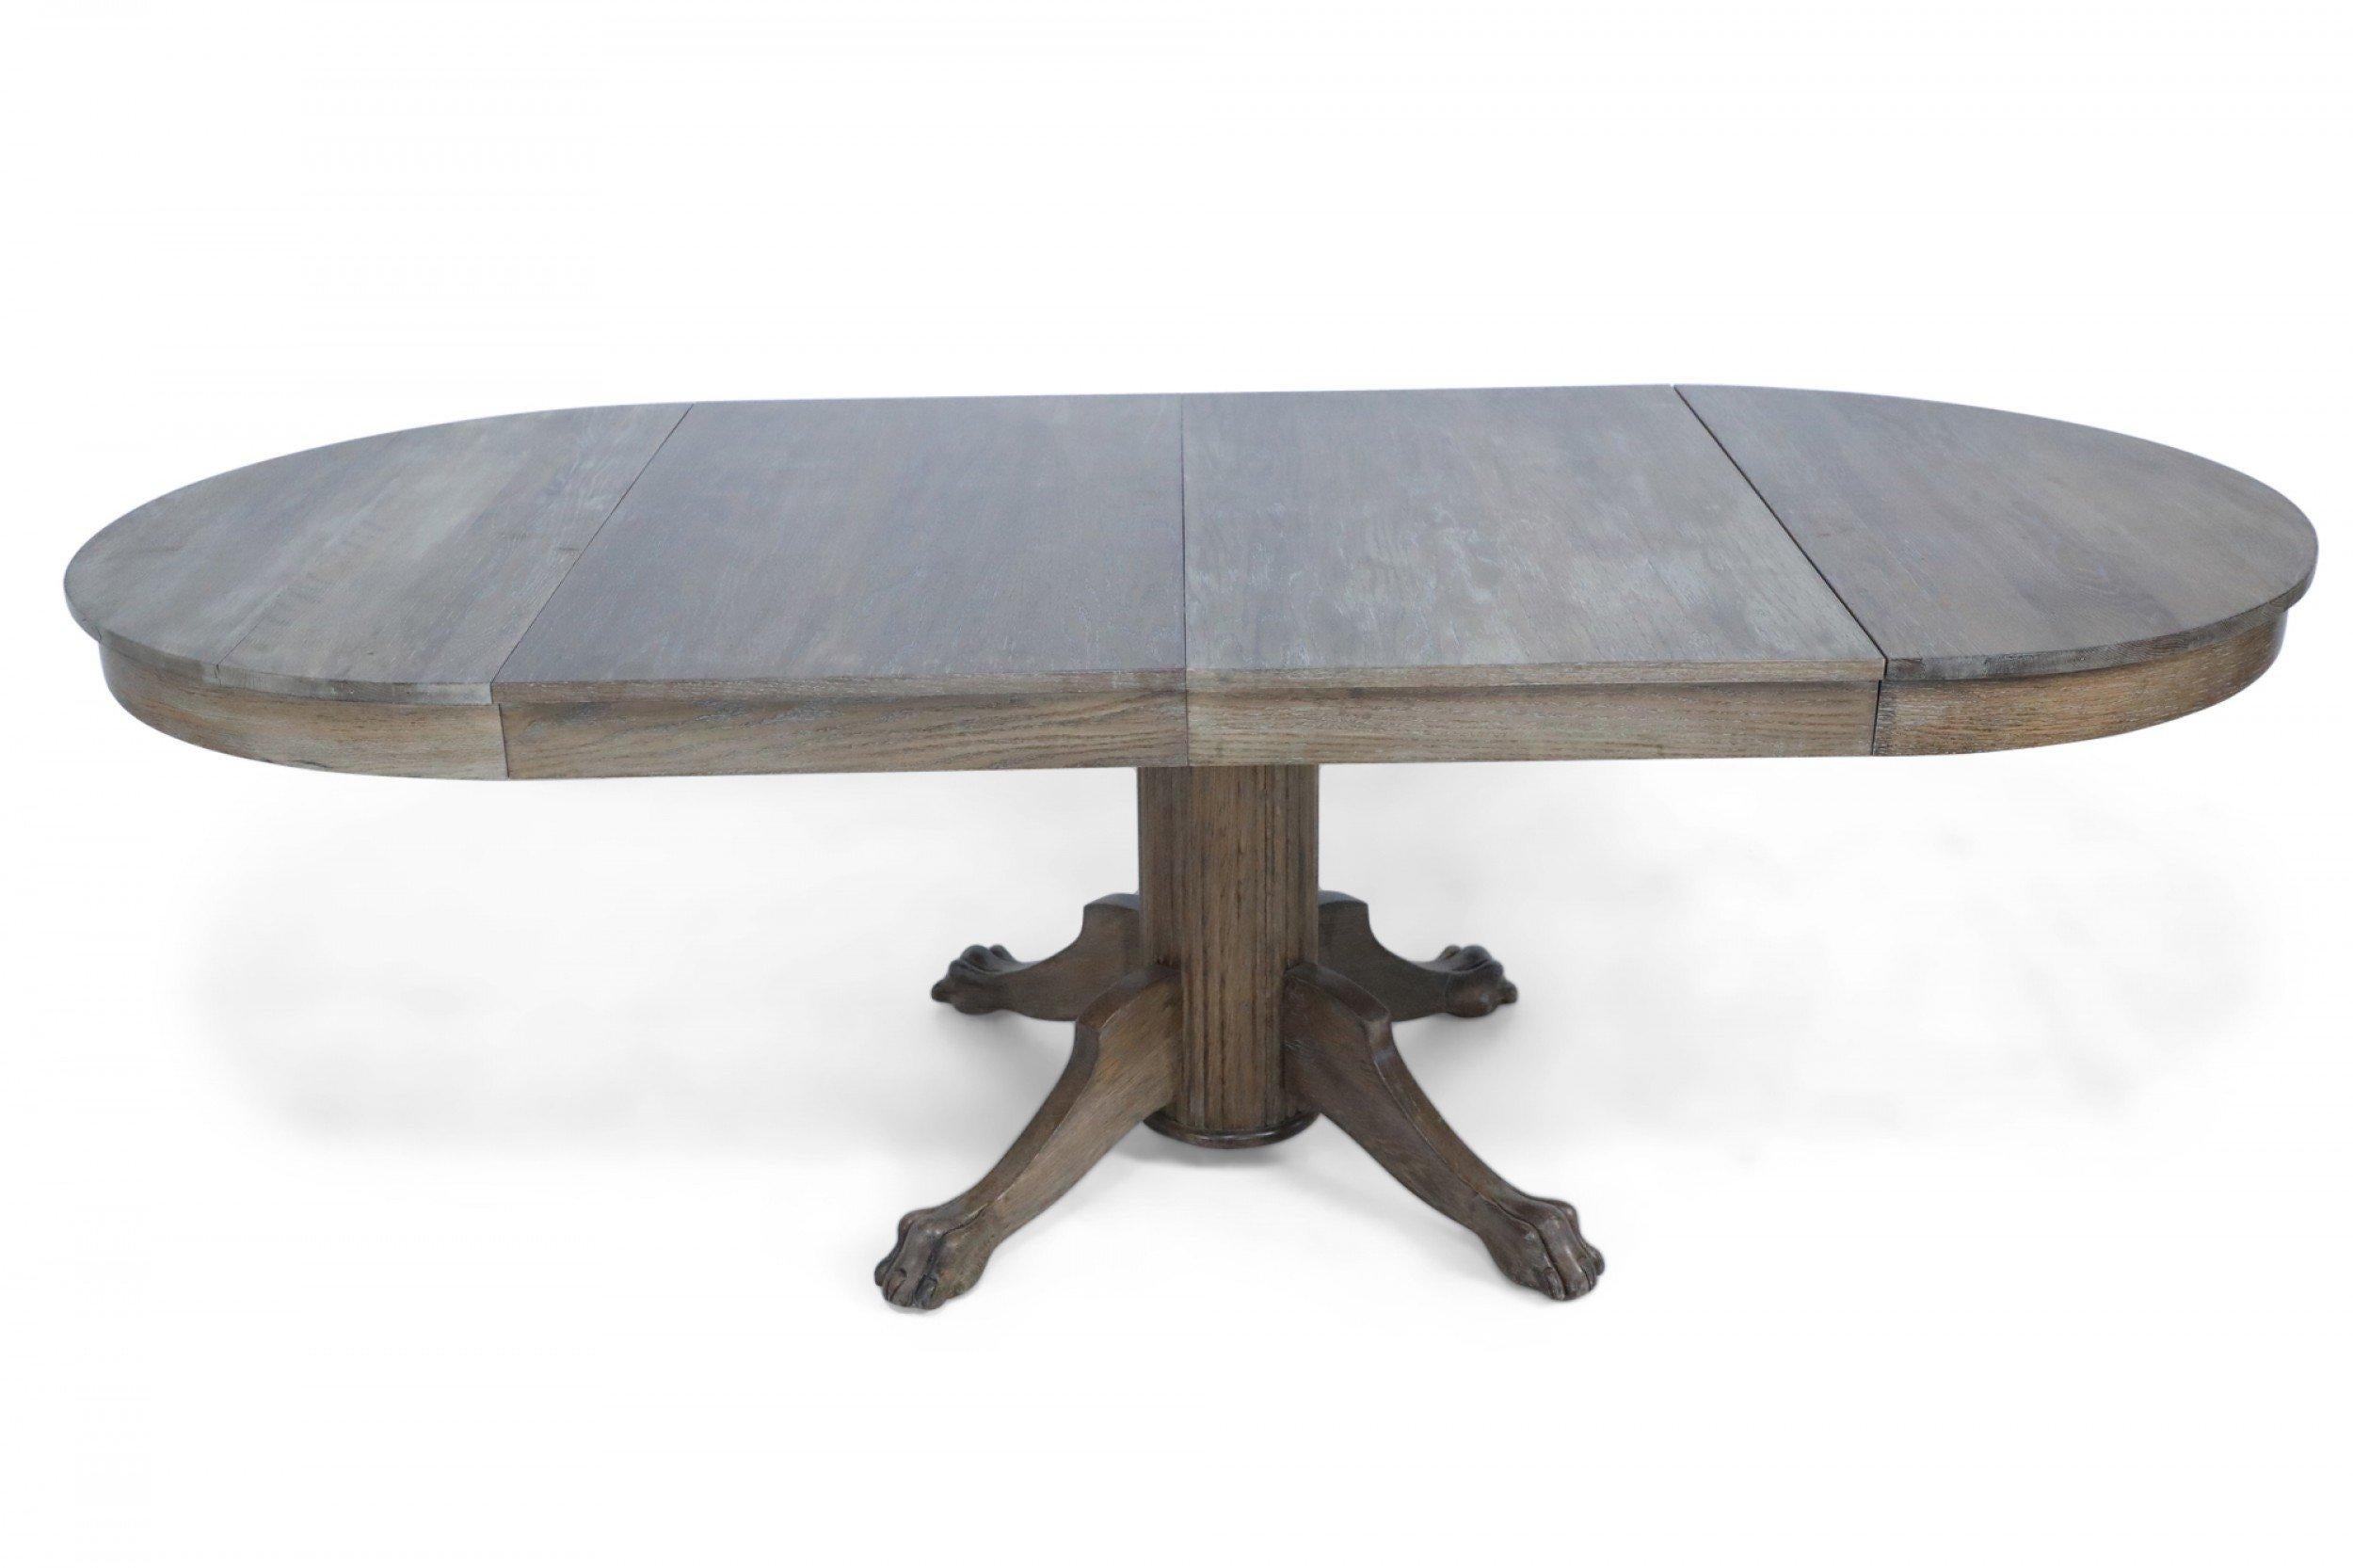 Wood English Edwardian Cerused Oak Circular Claw Foot Center/Dining Table with Leaves For Sale